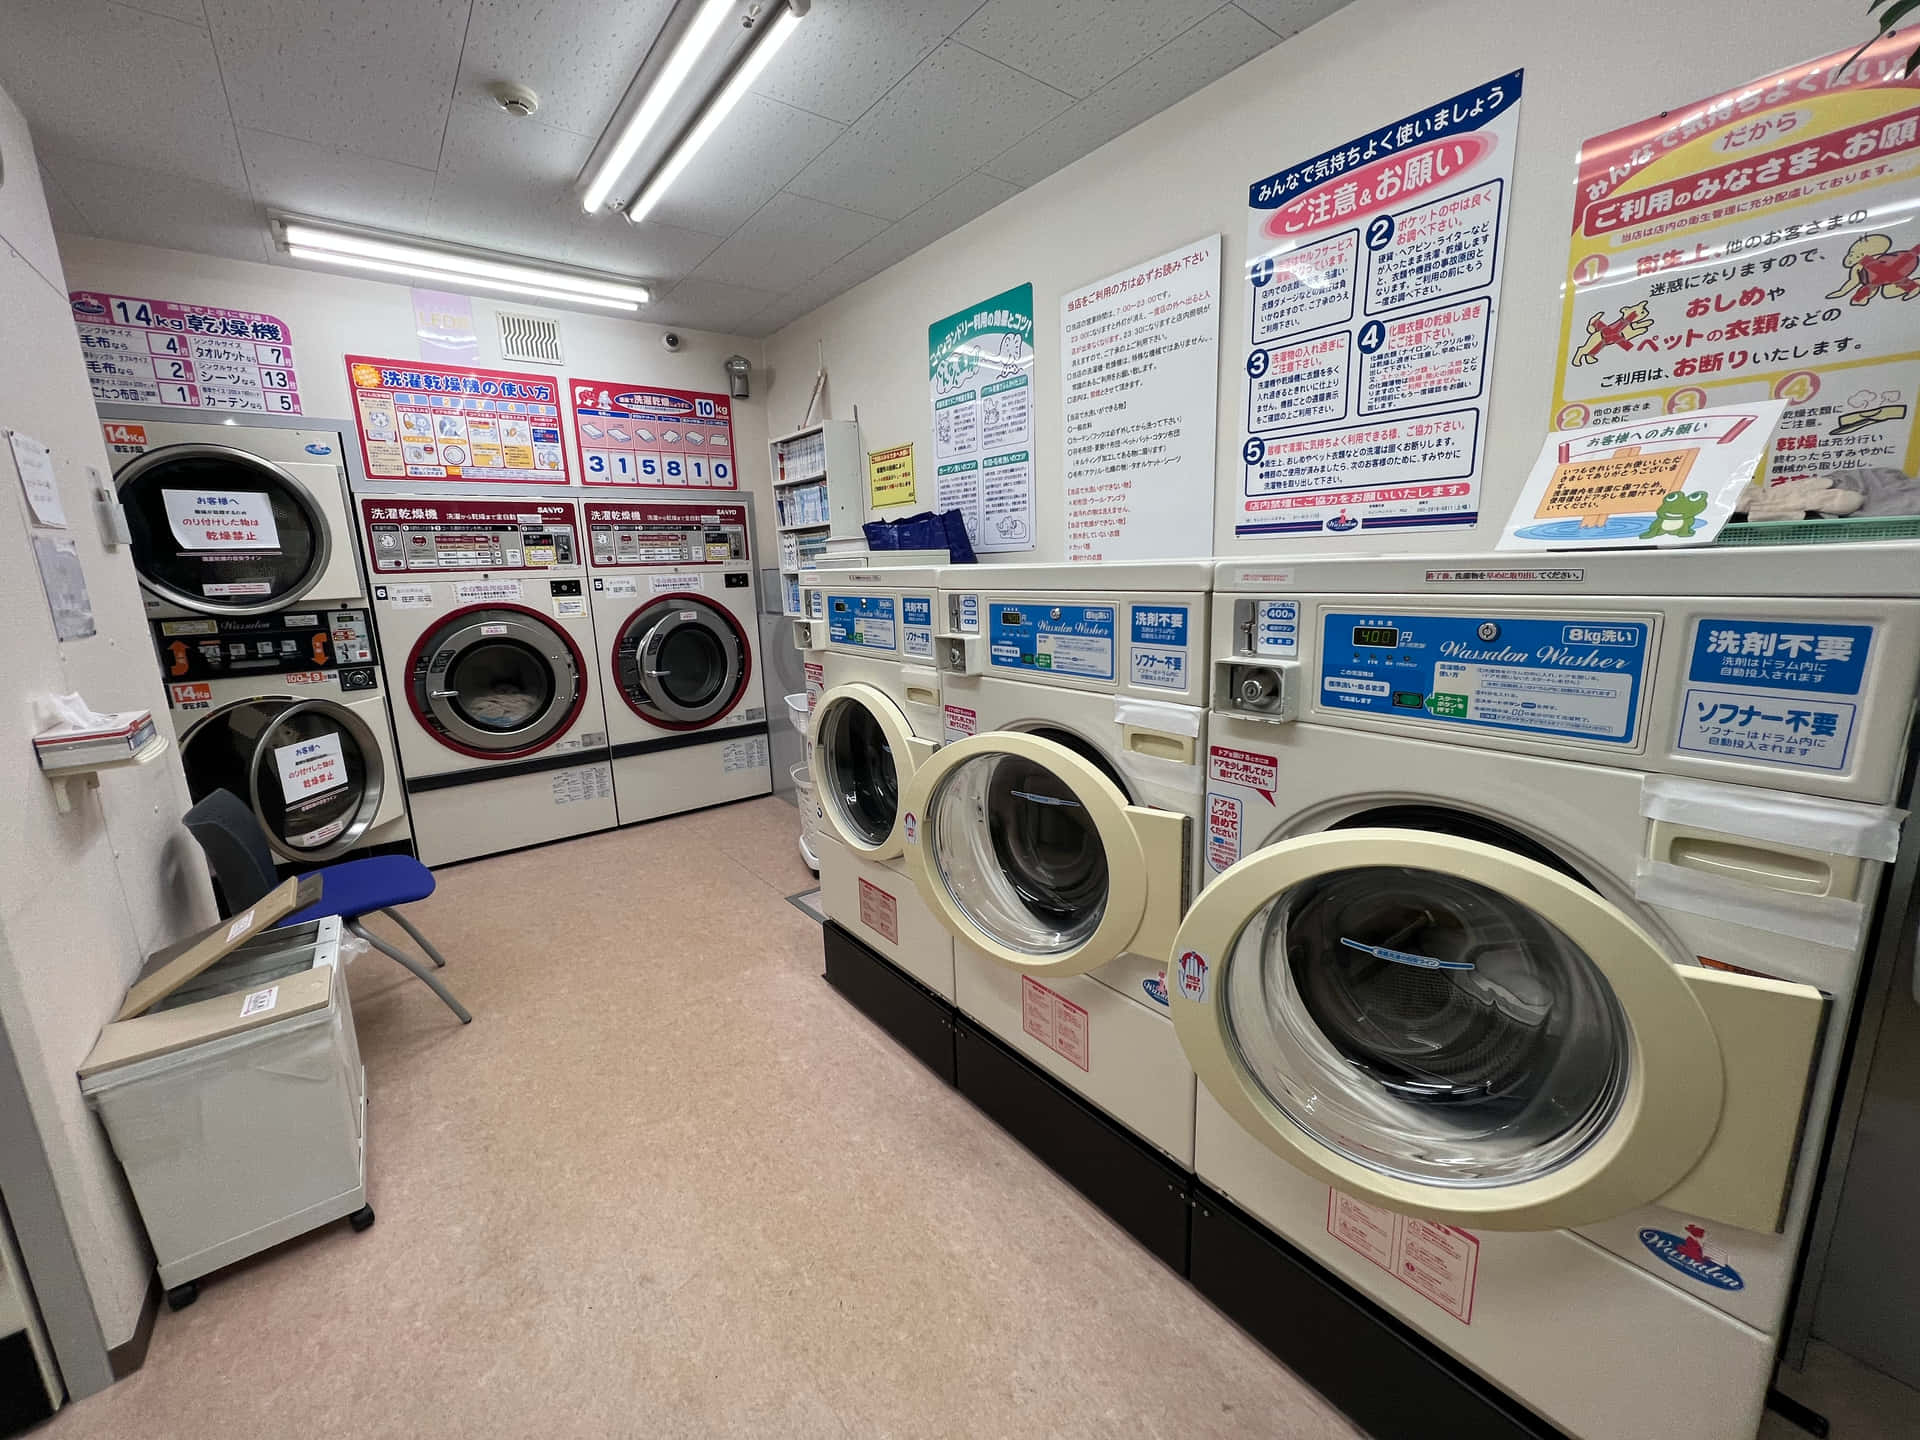 A Laundry Room With Several Machines And A Refrigerator